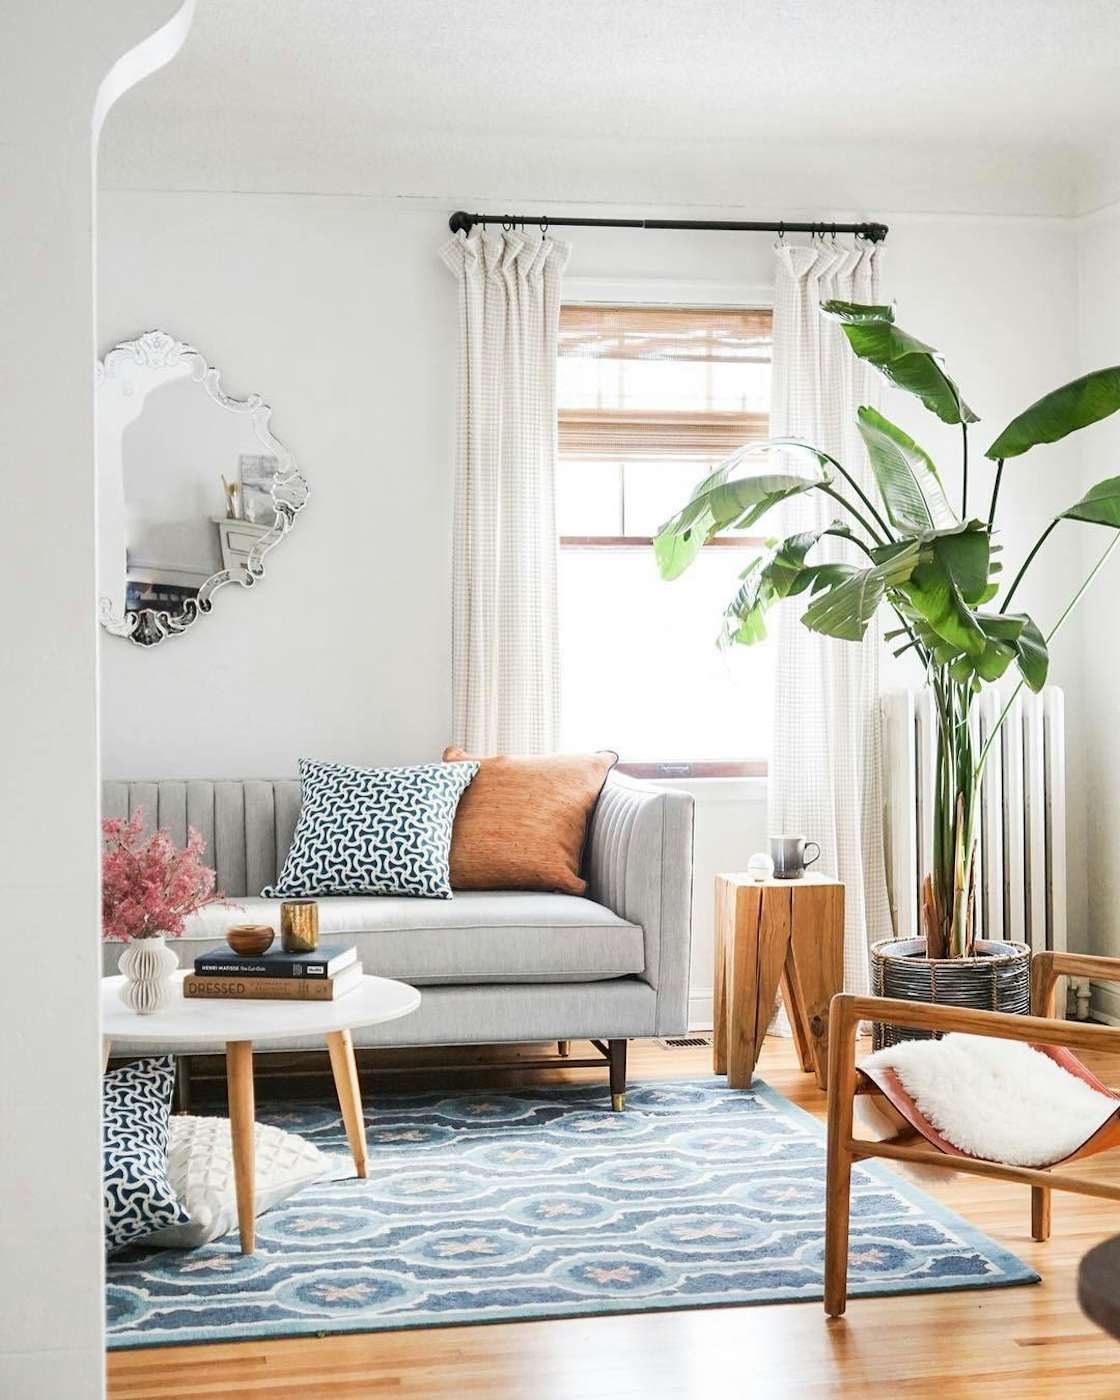 10 Home Renovators You Should Follow on Instagram Right Now - Dwell